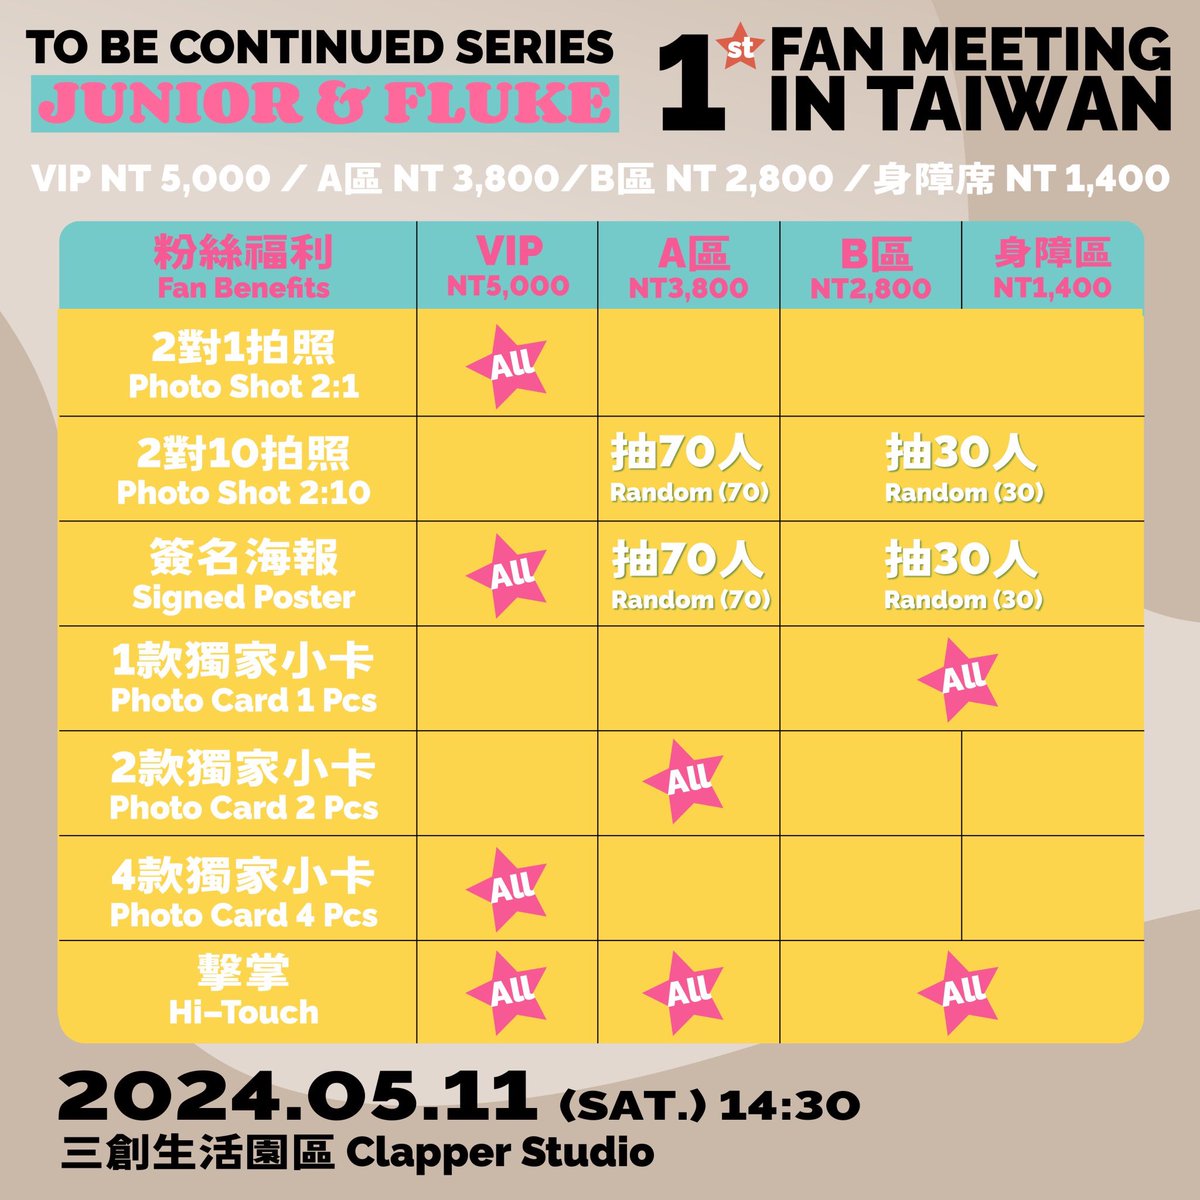 TO BE CONTINUED SERIES
JUNIOR&FLUKE 1ST FANMEETING IN TAIWAN✨

🩵Date: 11 MAY 2024
📍AT Clapper Studio
🎫Tickets on sale 20 APR 2024 

#JuniorFluke_1st_Fan_Meeting_in_TAIWAN 
#JuniorFluke #ToBeContinuedSeries #คุณได้ไปต่อ